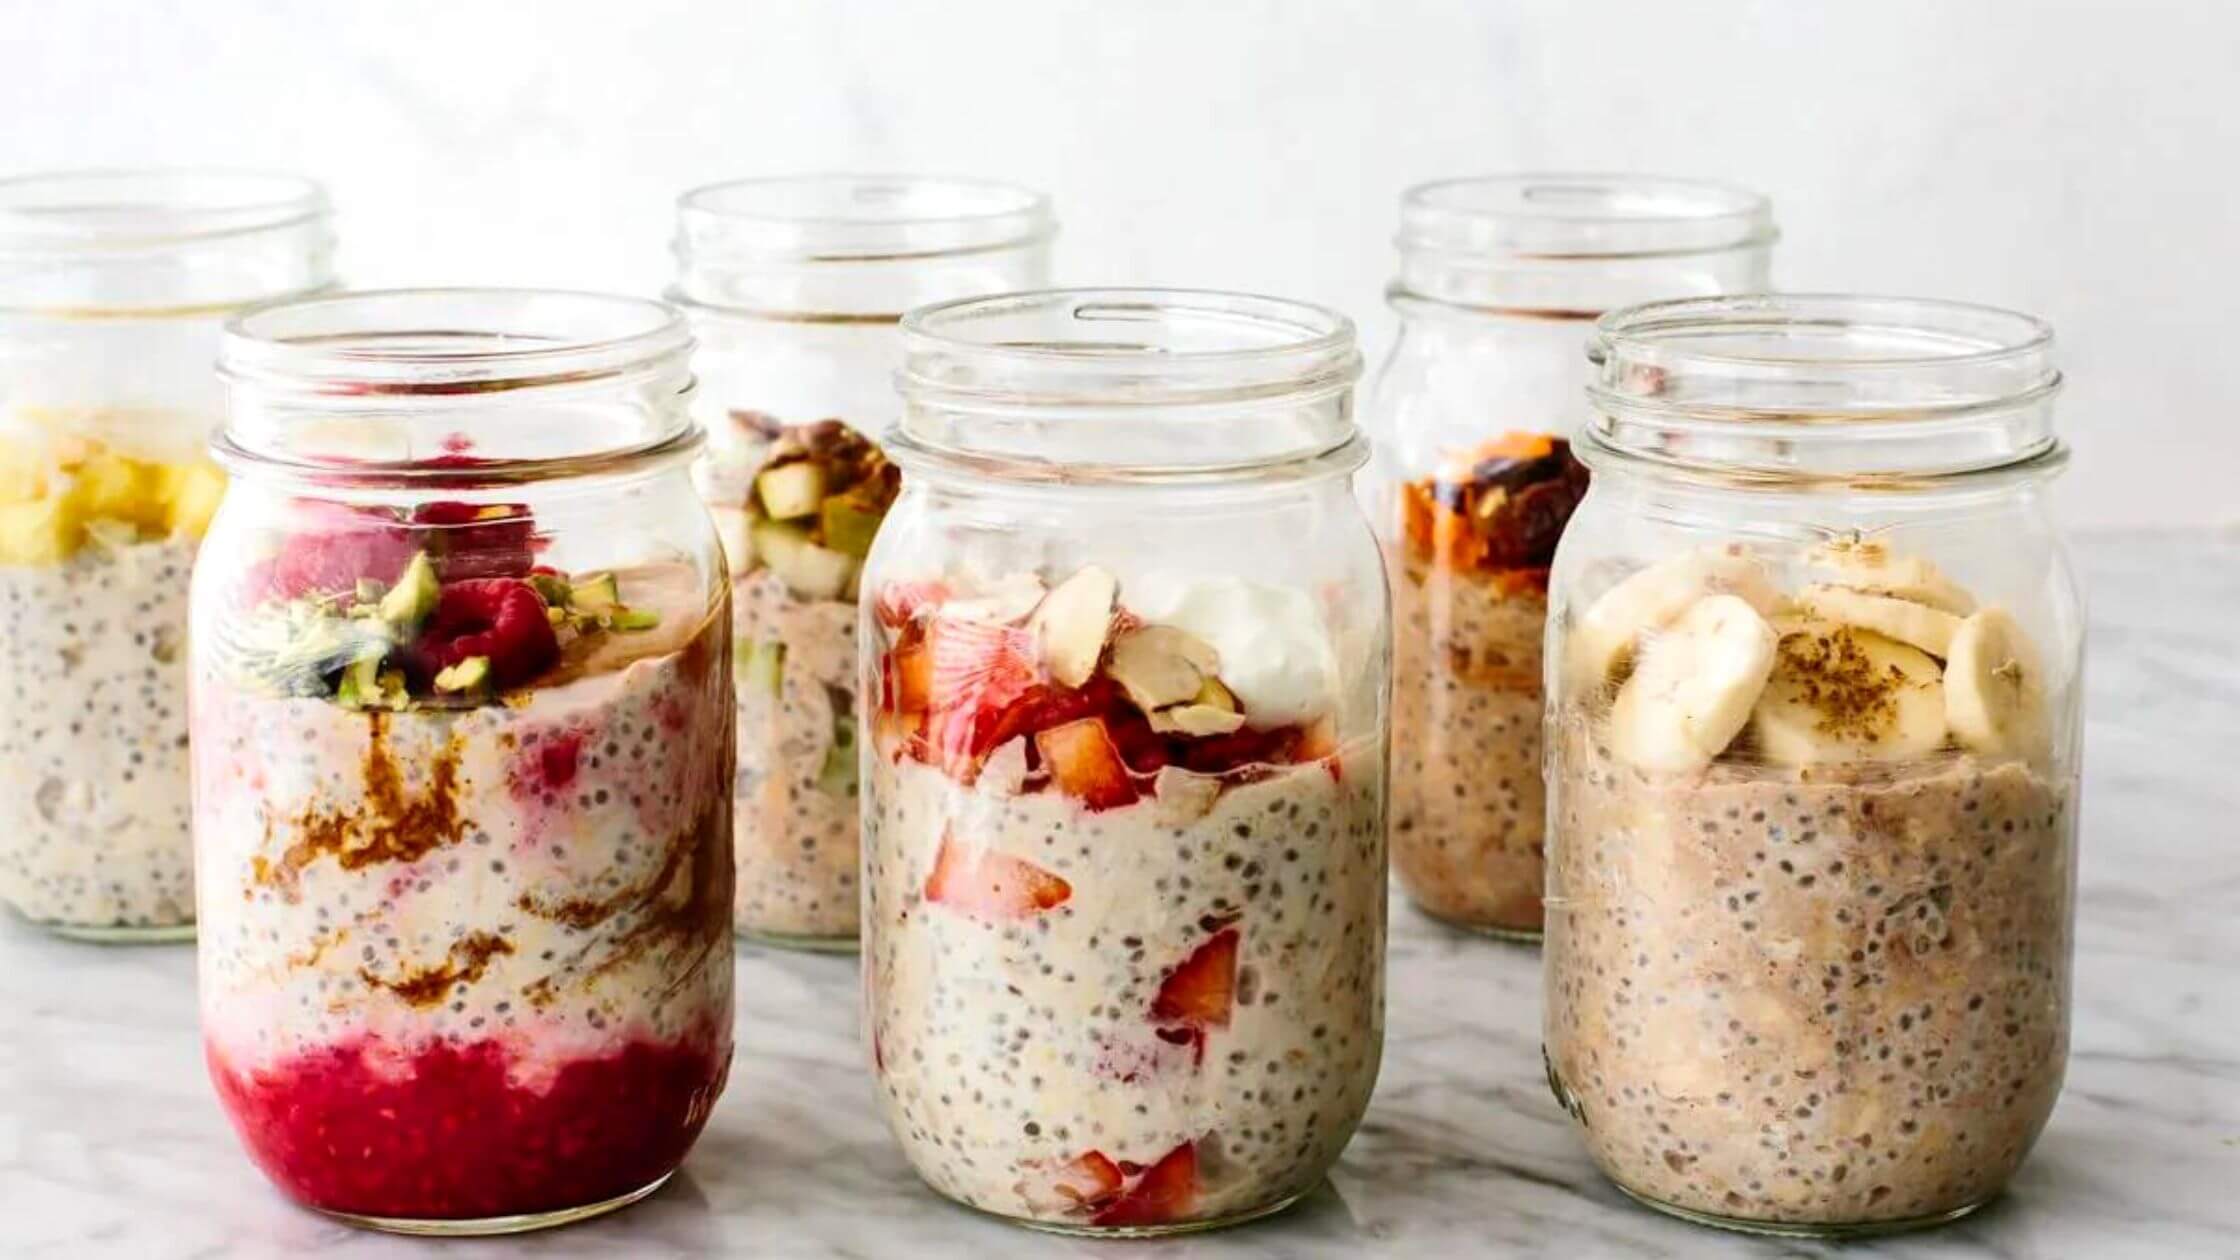 Benefits Of Low-Calorie Overnight Oats